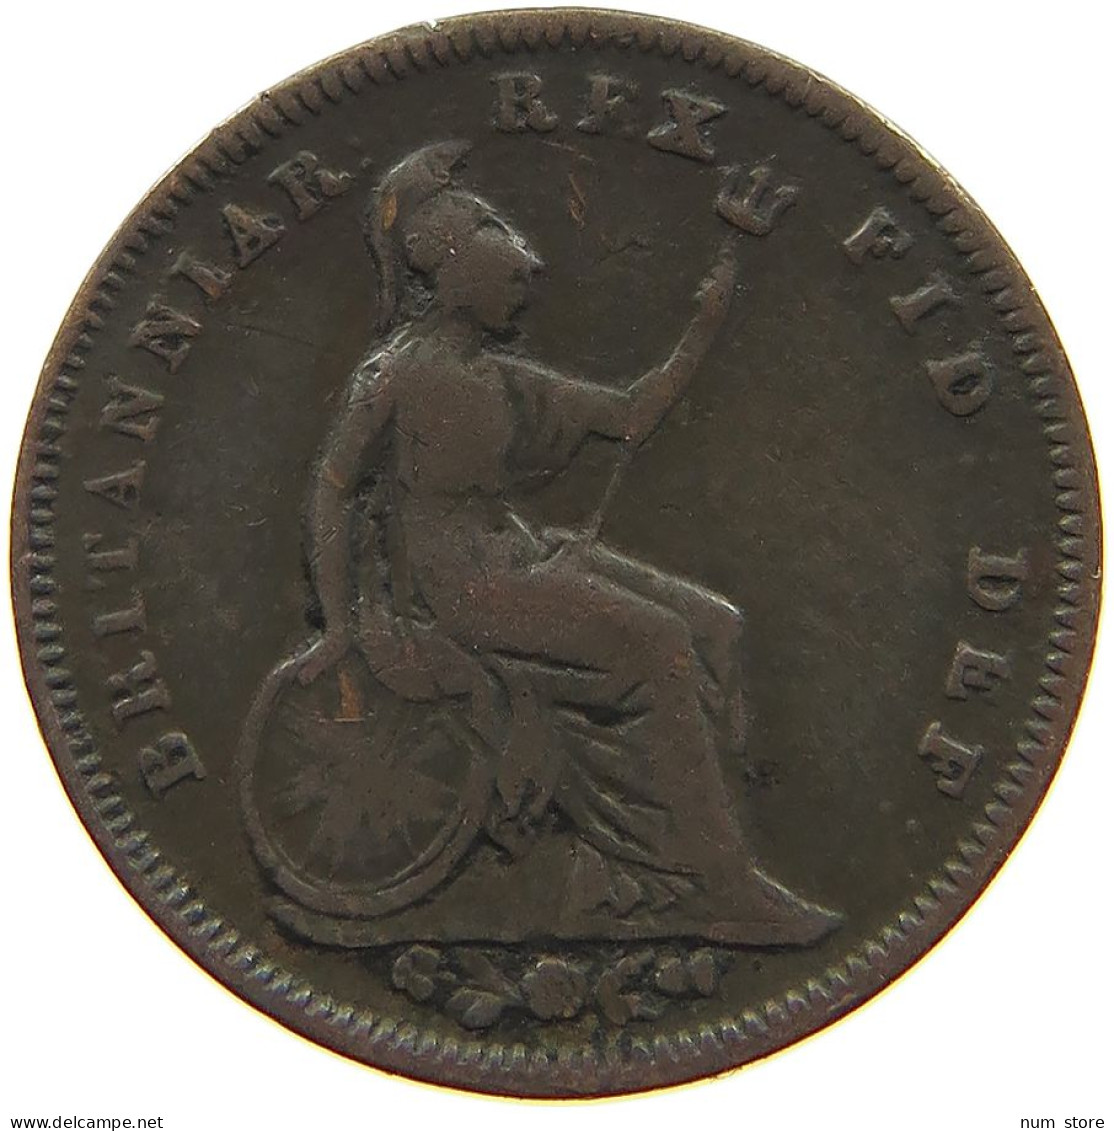 GREAT BRITAIN 1/3 FARTHING 1827 GEORGE IV. (1820-1830) #t158 0225 - A. 1/4 - 1/3 - 1/2 Farthing